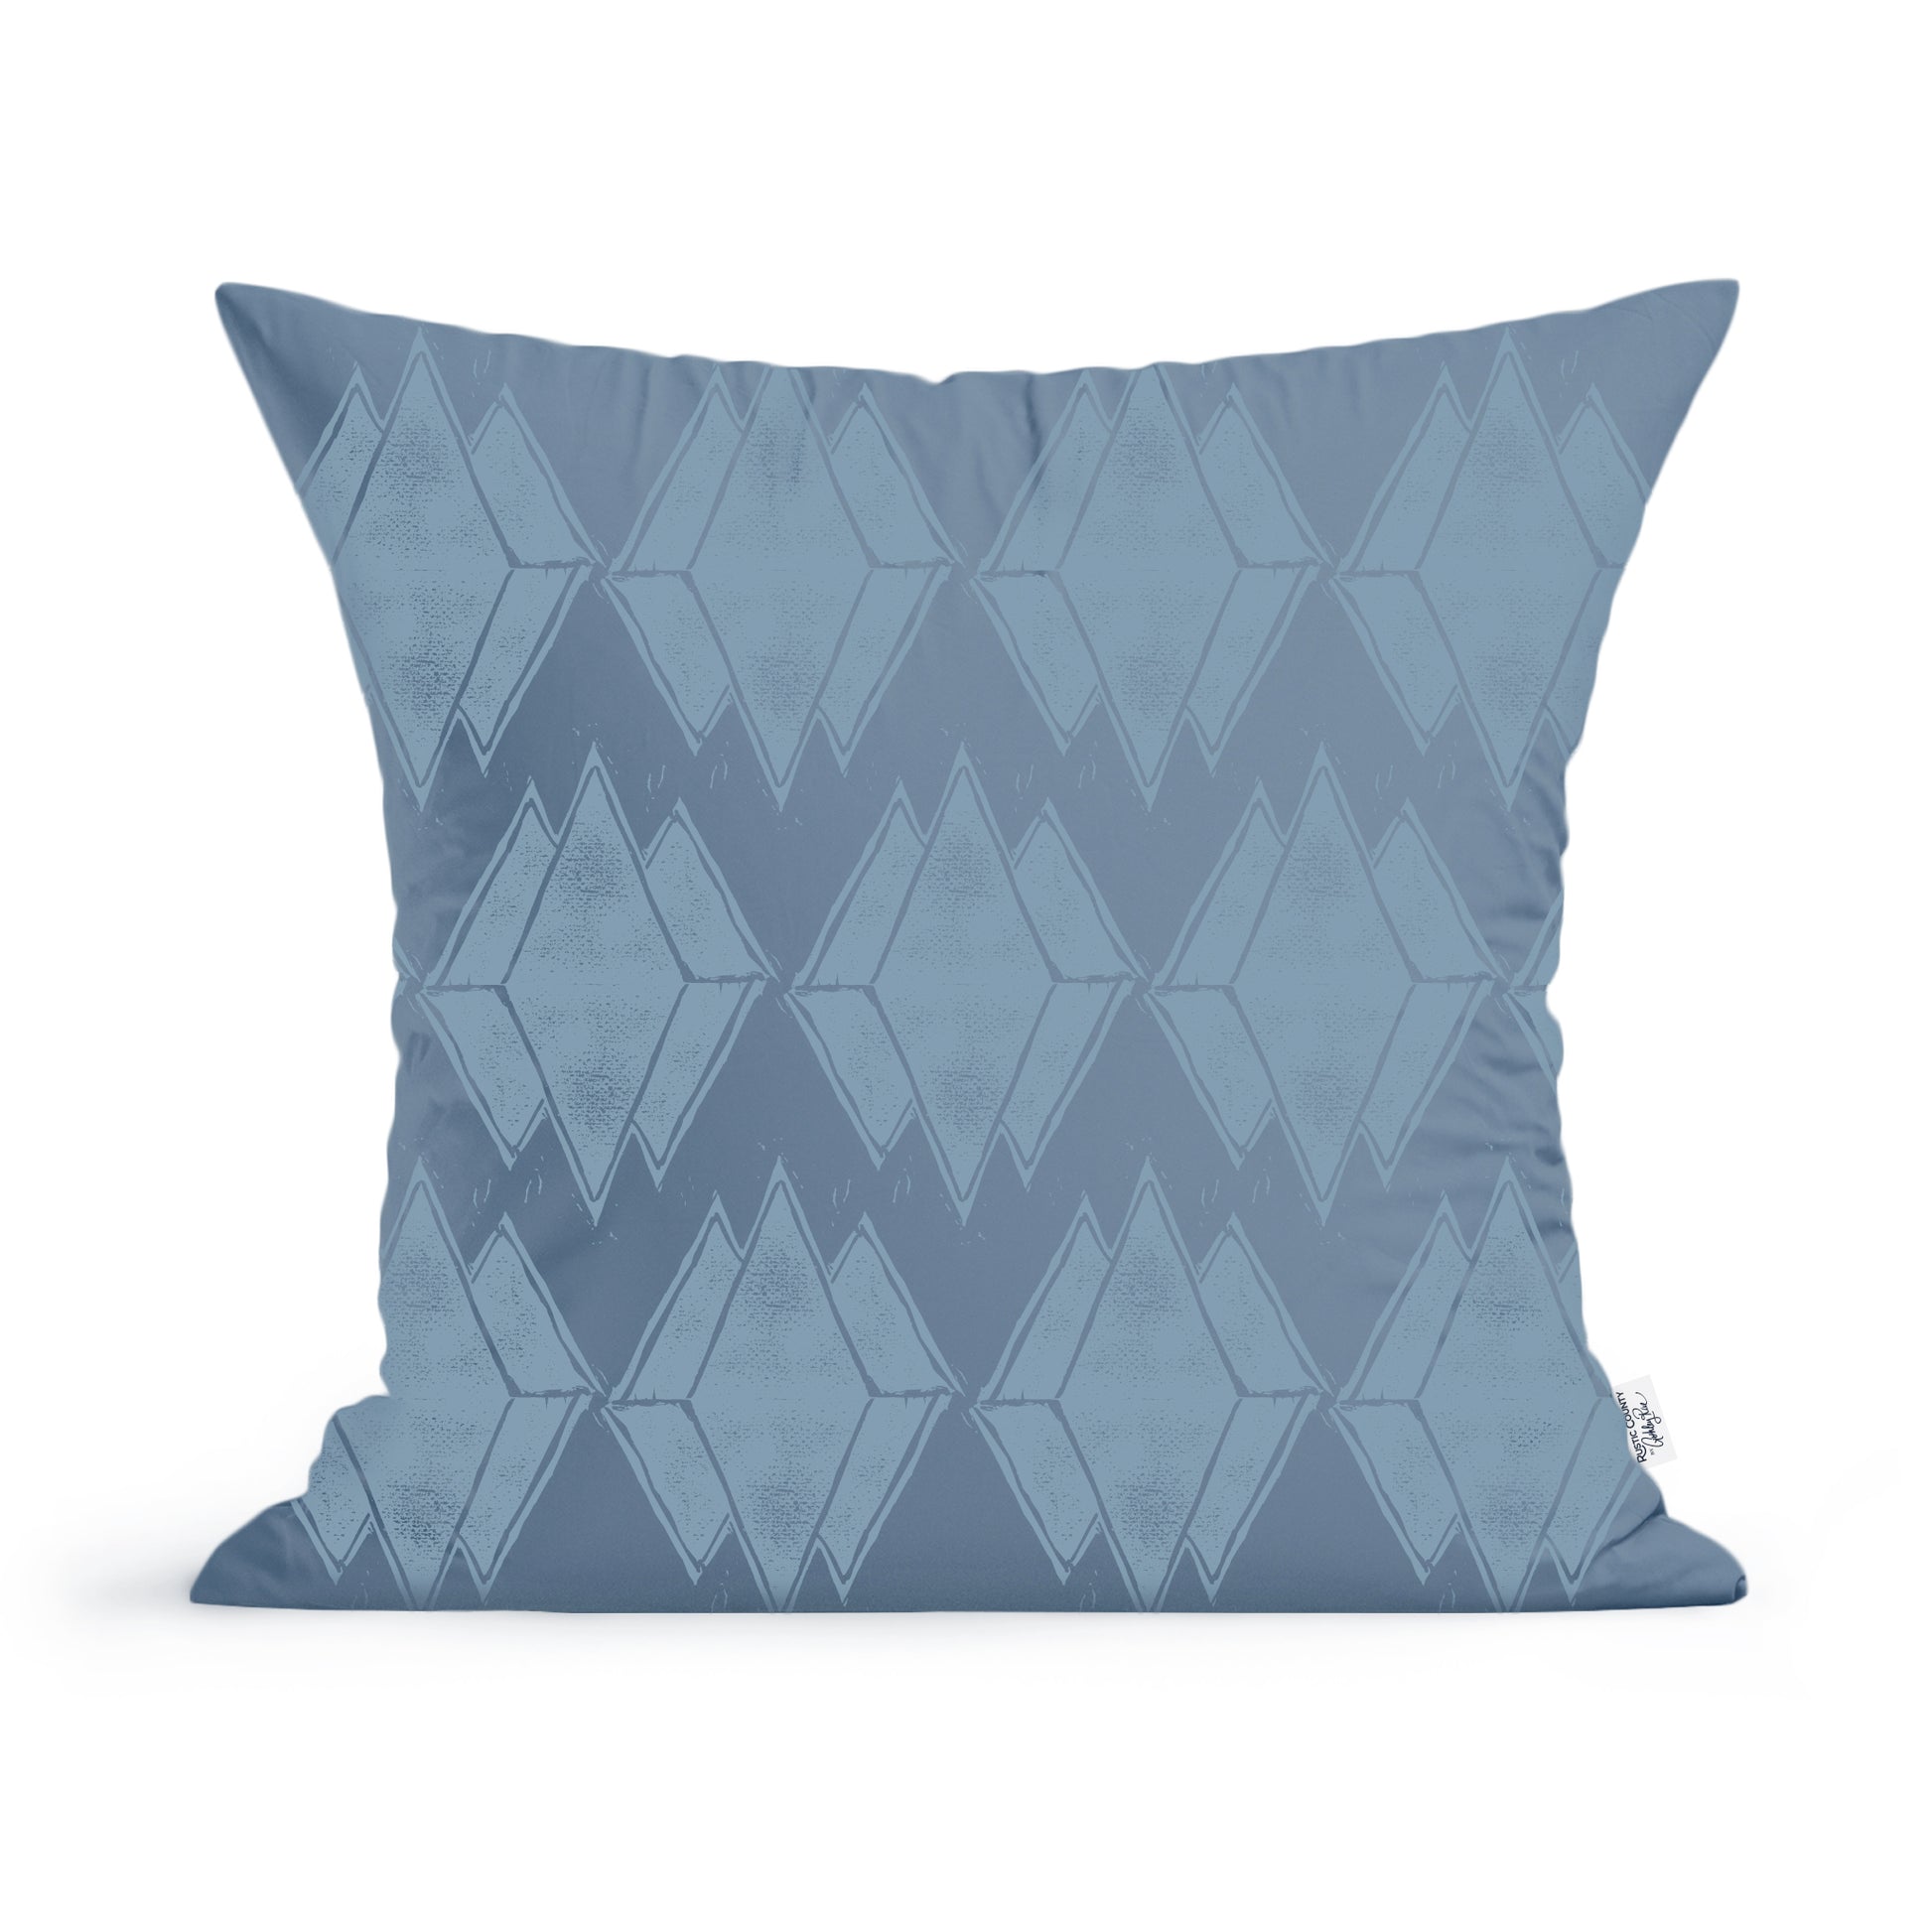 A Rustic County Maine Mountain Reflections Pillow with a geometric pattern in shades of blue, featuring a series of repeated diamond and triangular shapes. The background is a light blue with slightly darker blue designs, ideal for modern home decor.